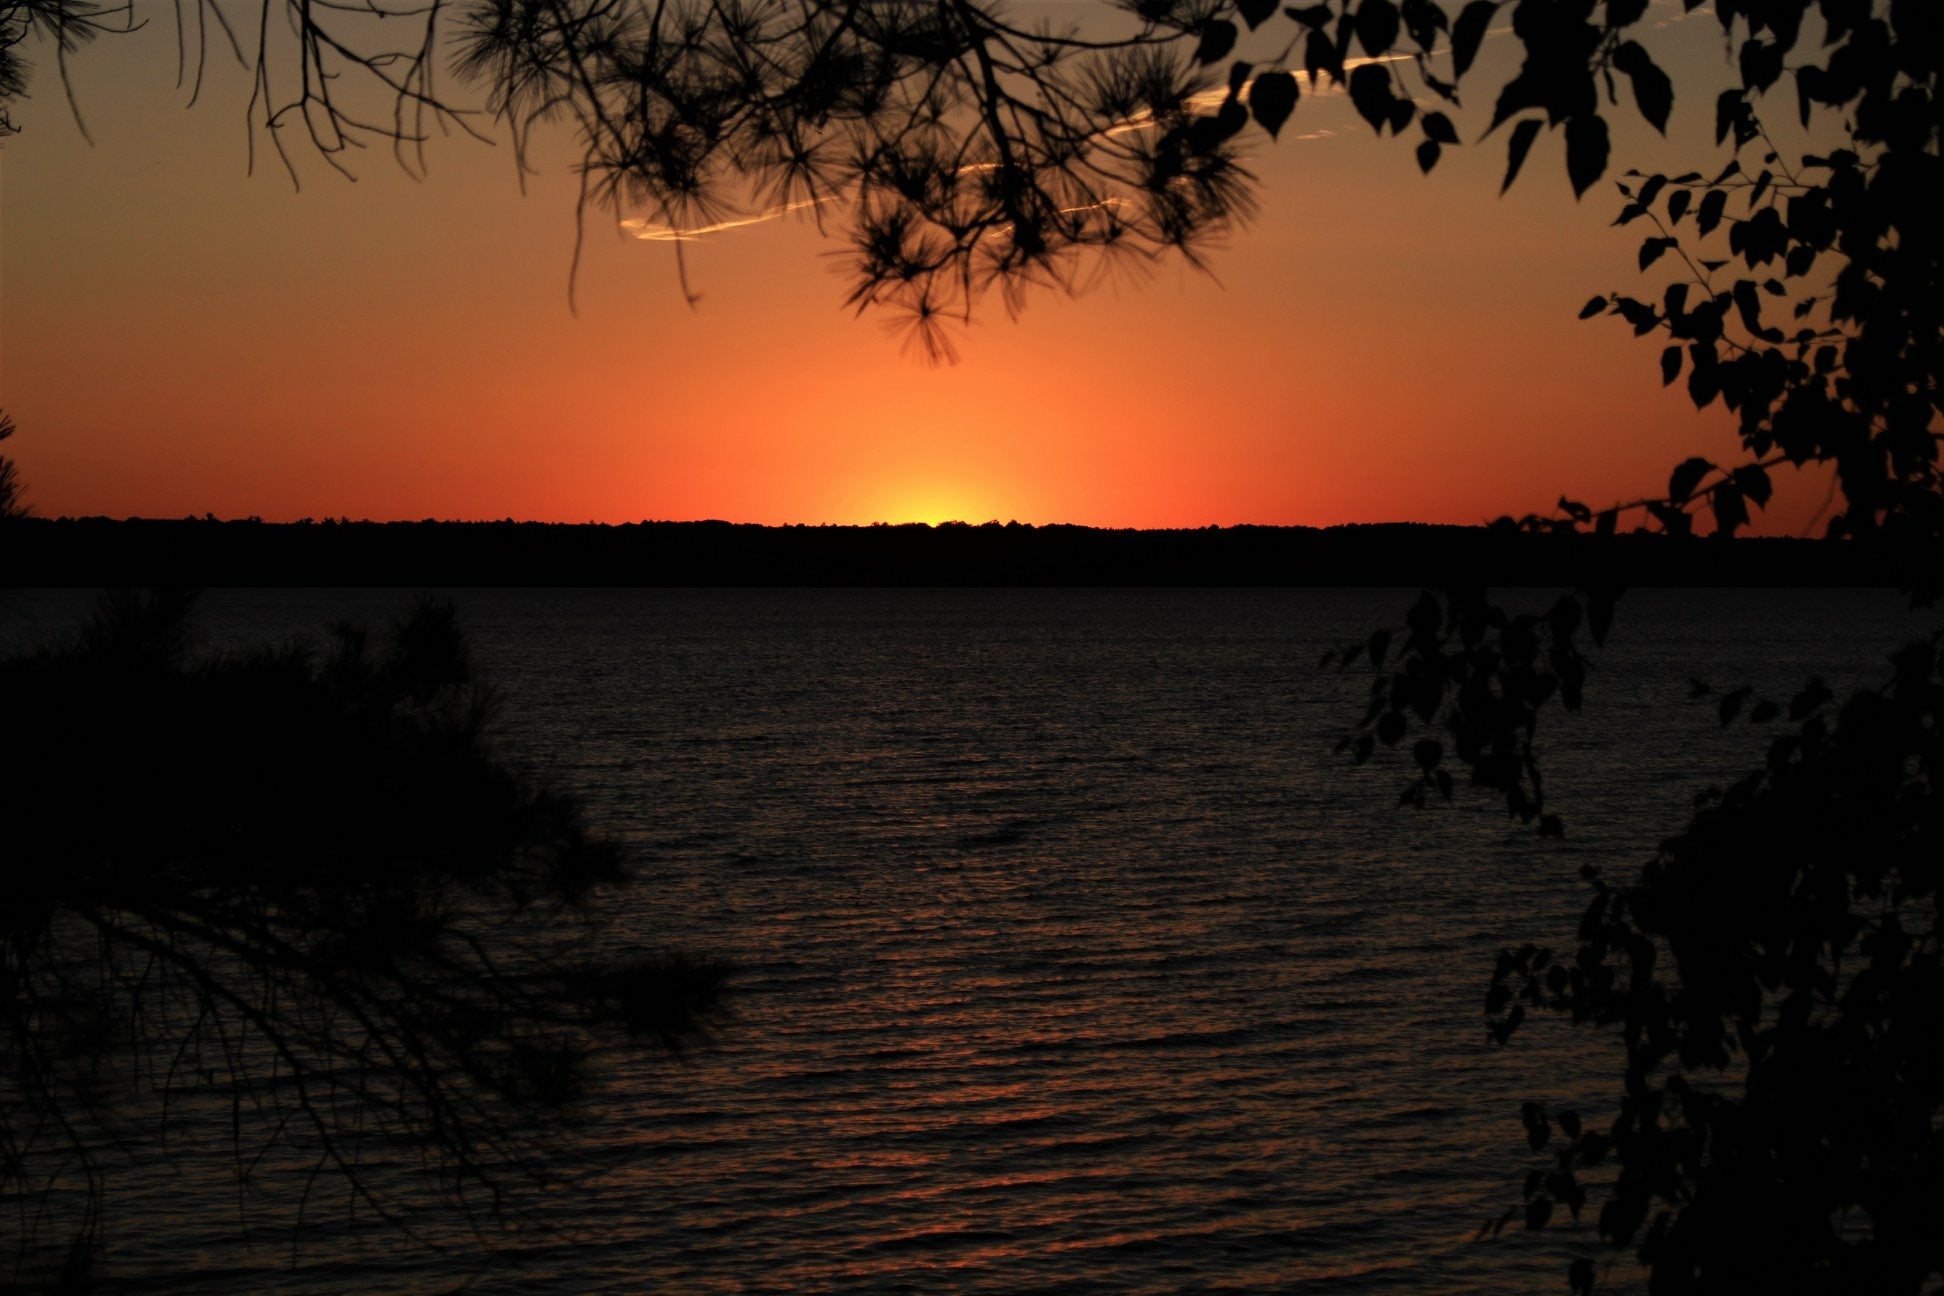 Sunset over Indian lake